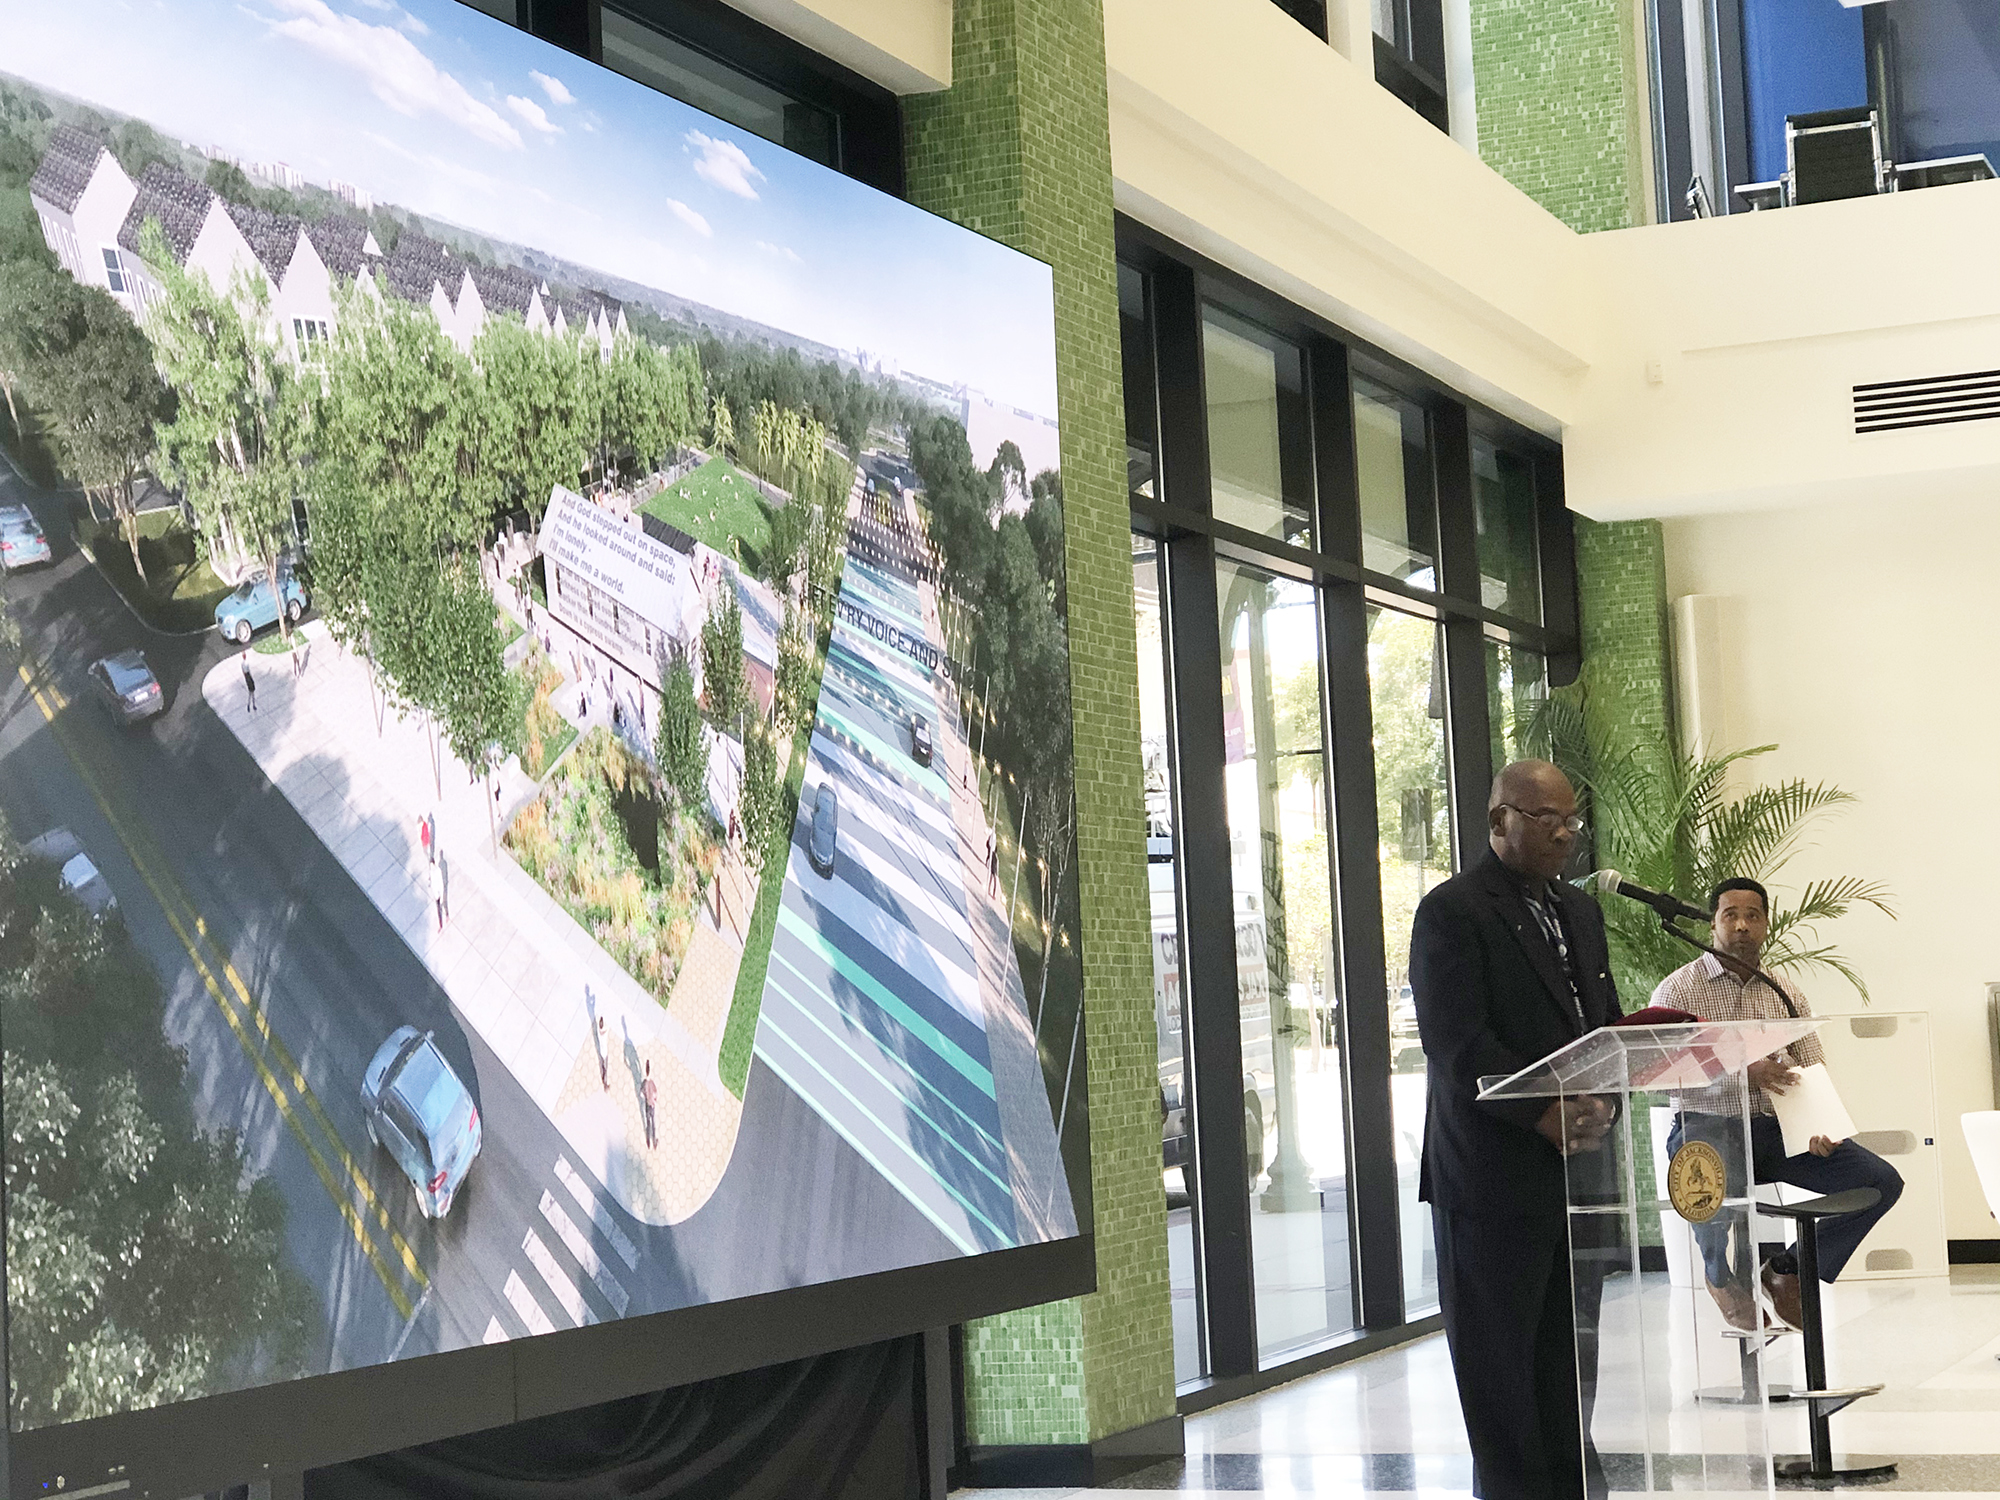 District  7 Council member Reggie Gaffney speaks while city Parks, Recreation and Community Services Department Director Daryl Joseph watches during the reveal presentation.